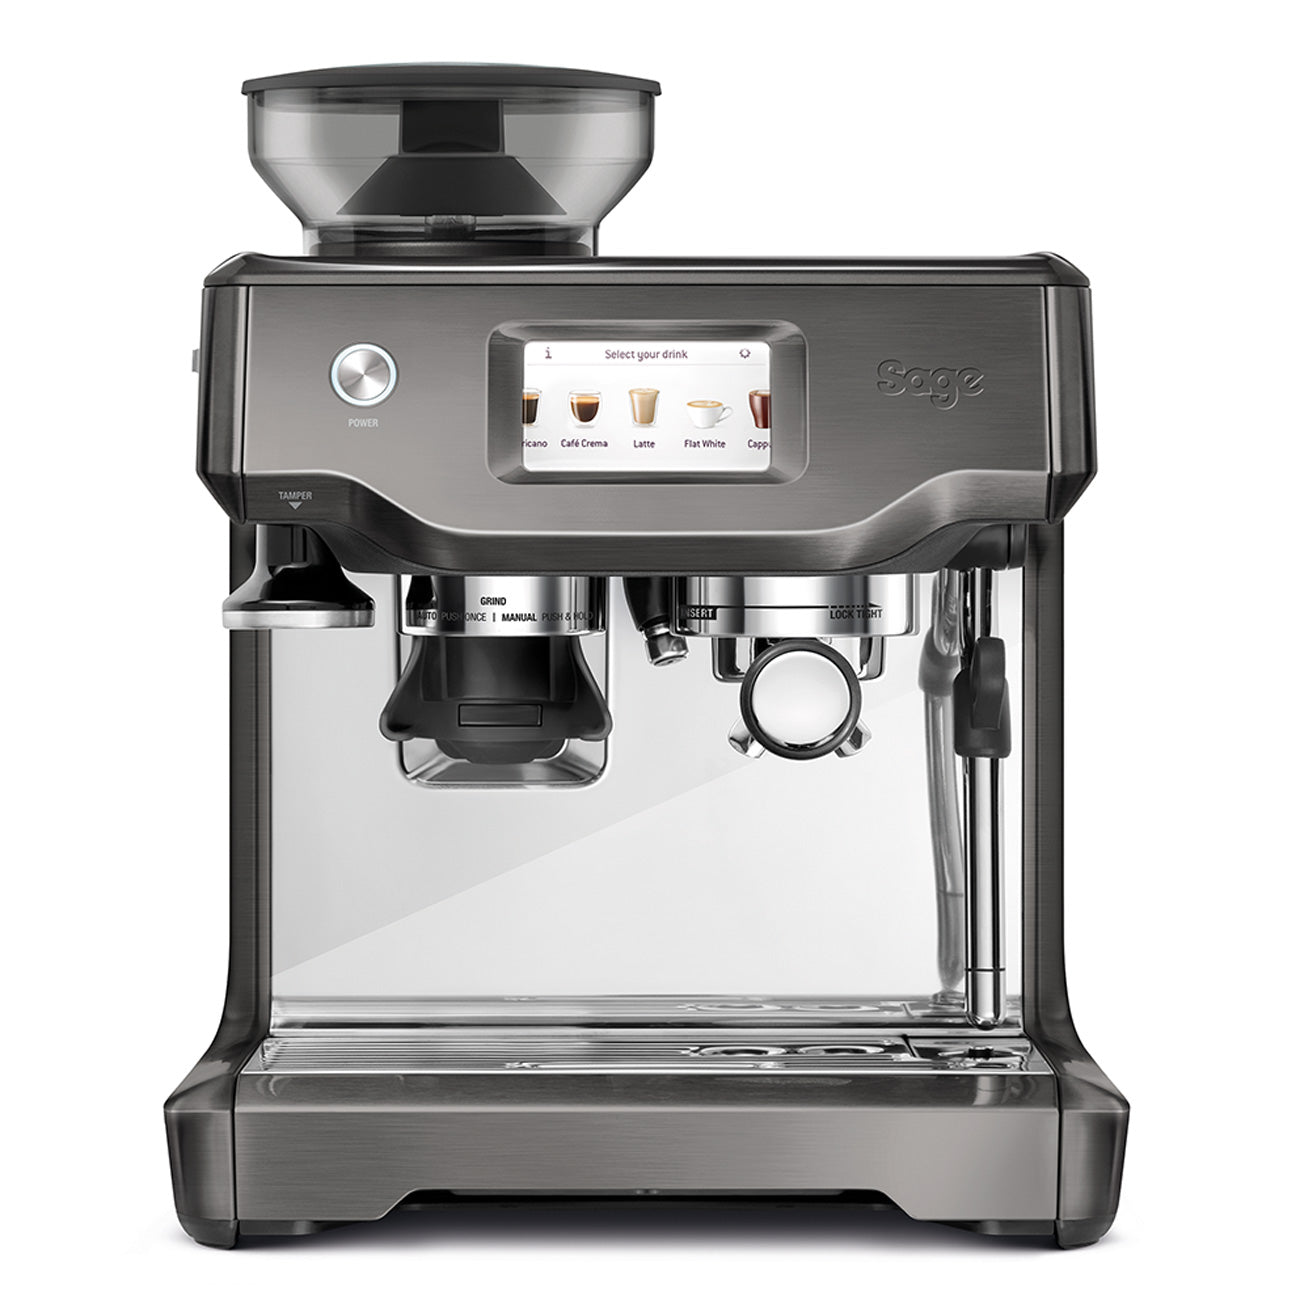 Sage Barista Express Bean-to-Cup Coffee Machine, Stainless Steel/Black